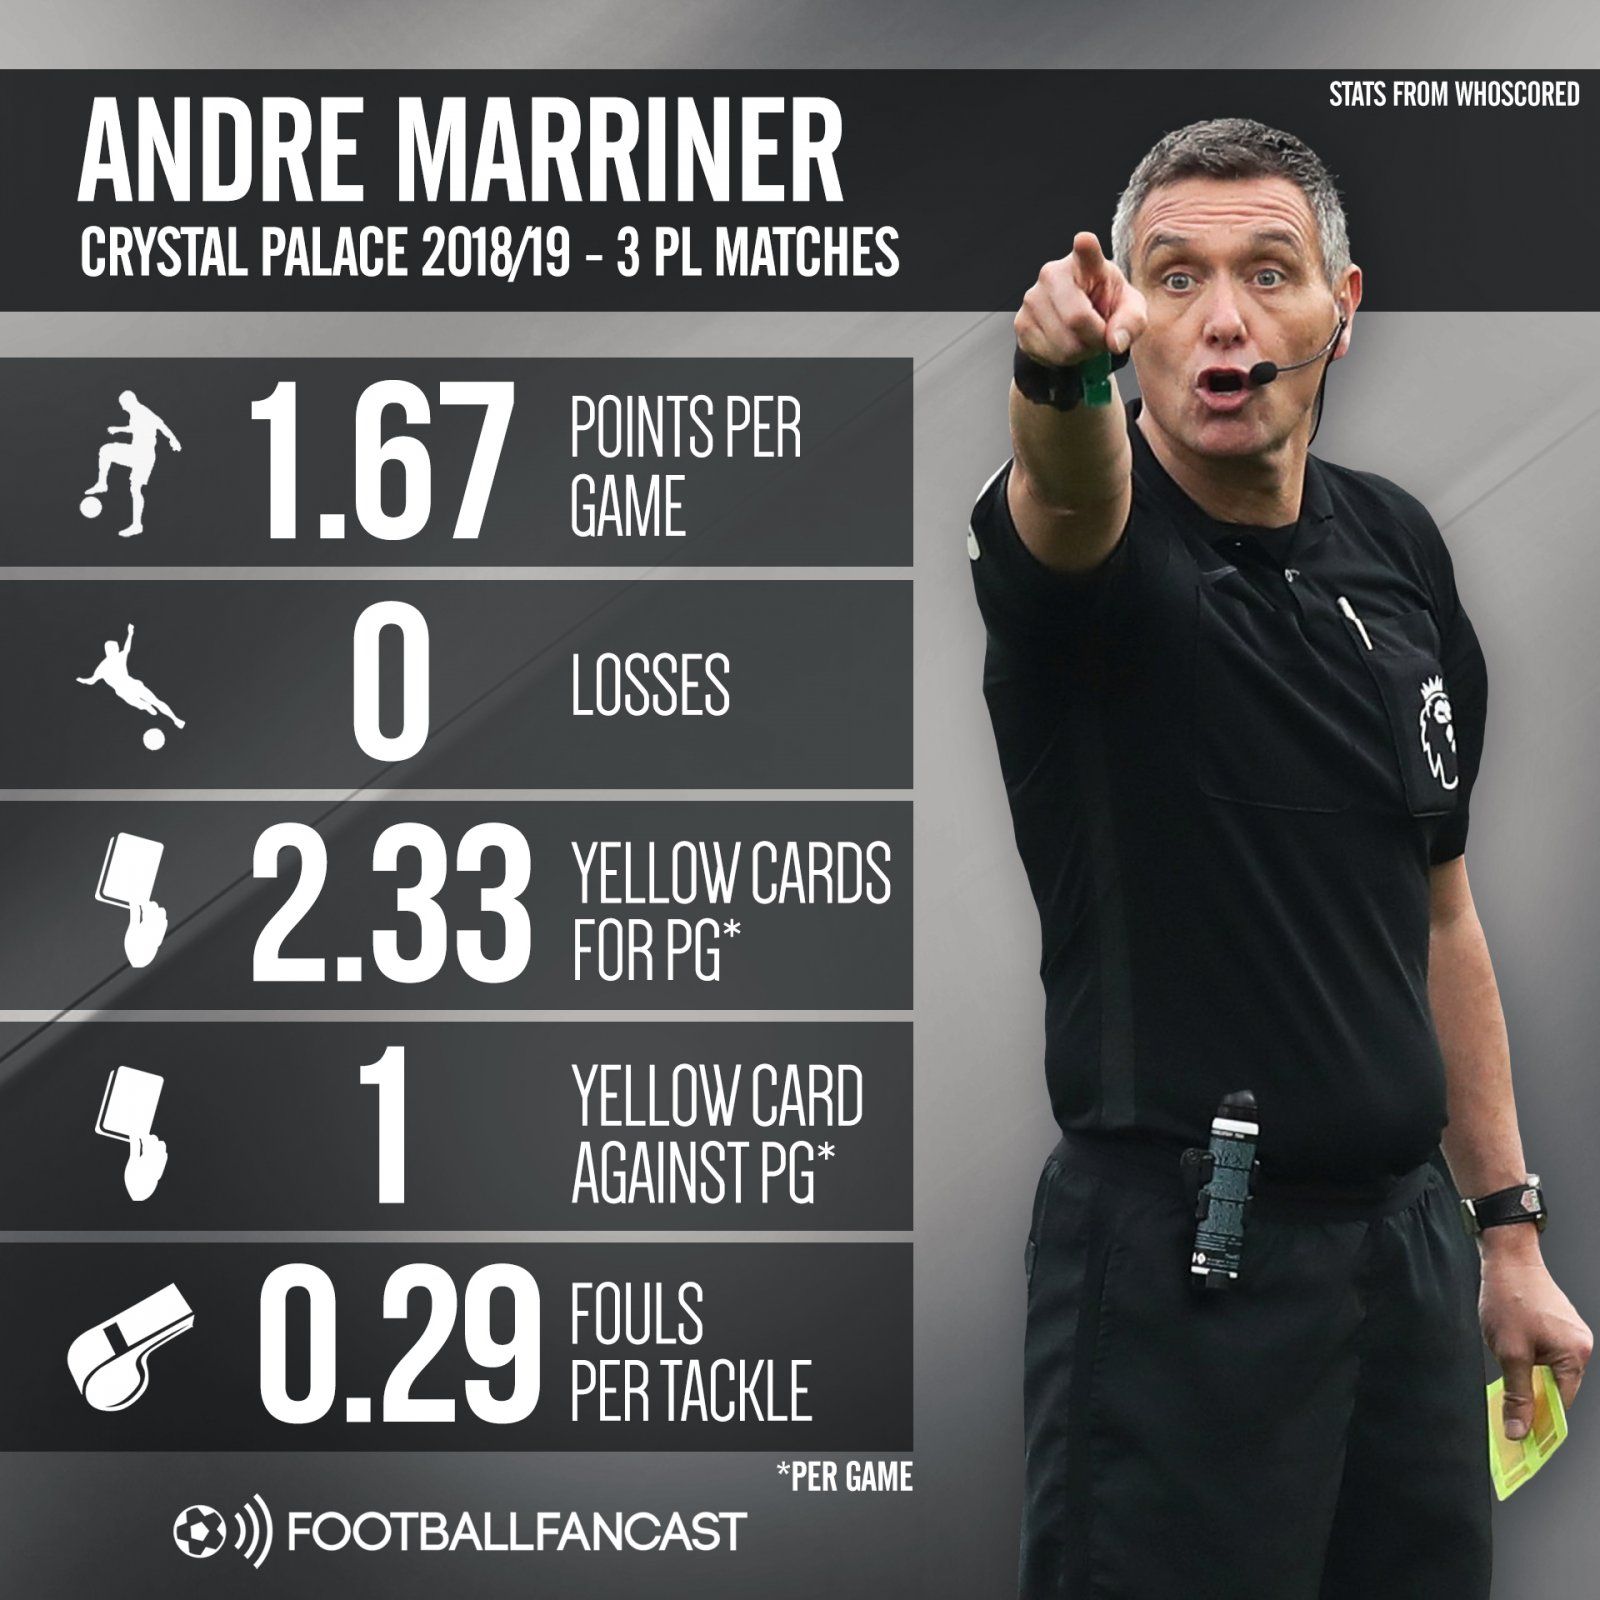 Andre Marriner's stats when refereeing Crystal Palace matches this season